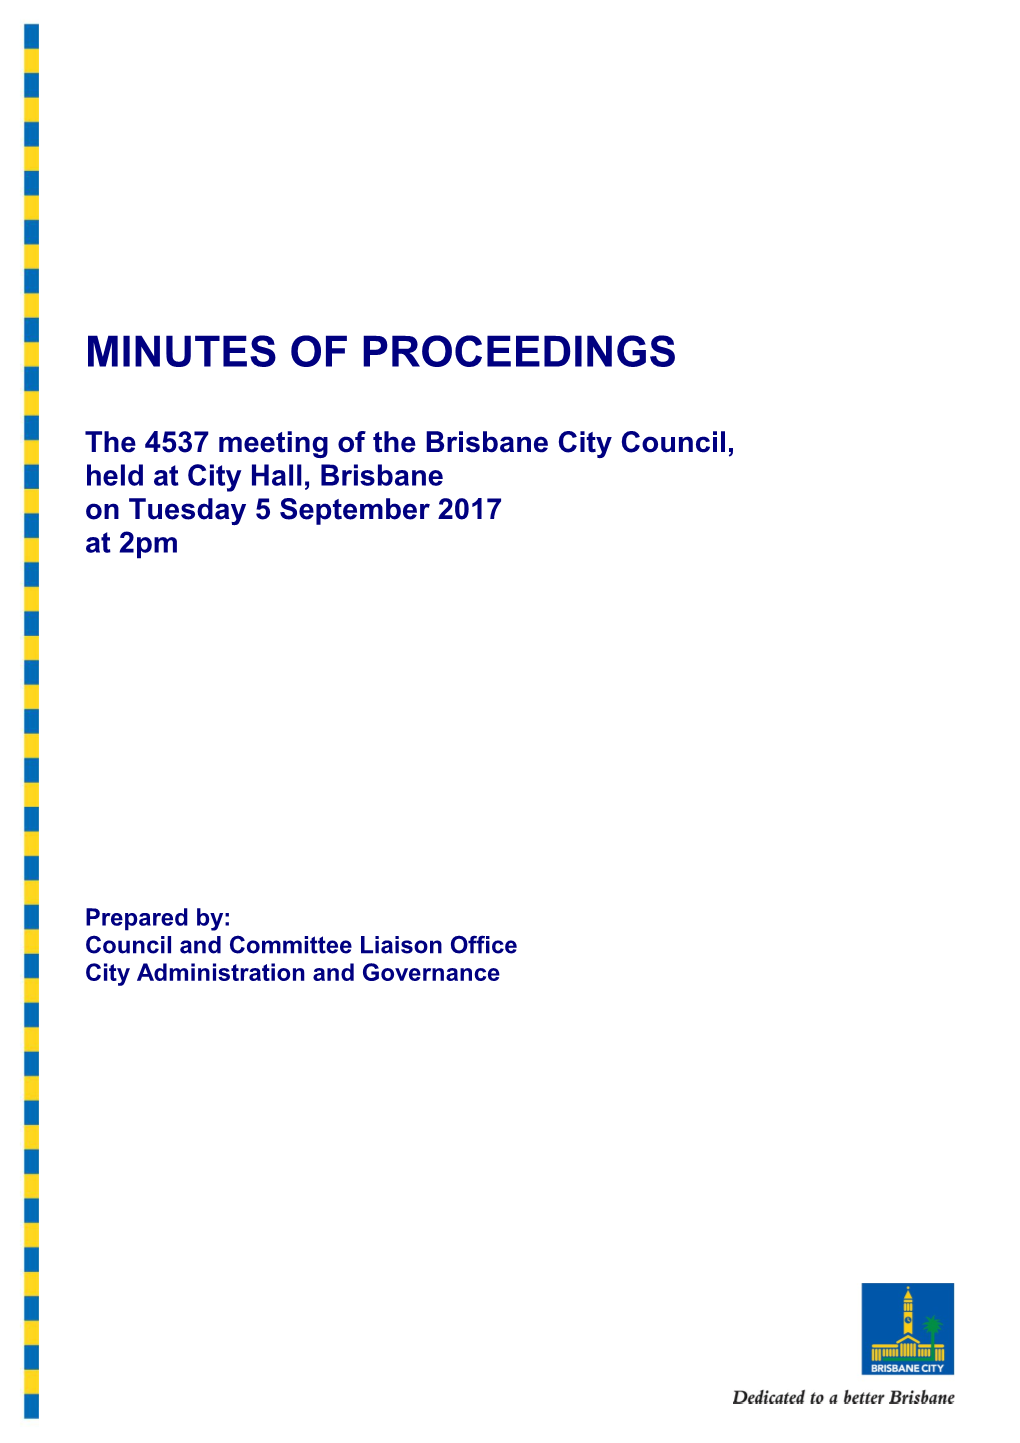 The 4537 Meeting of the Brisbane City Council